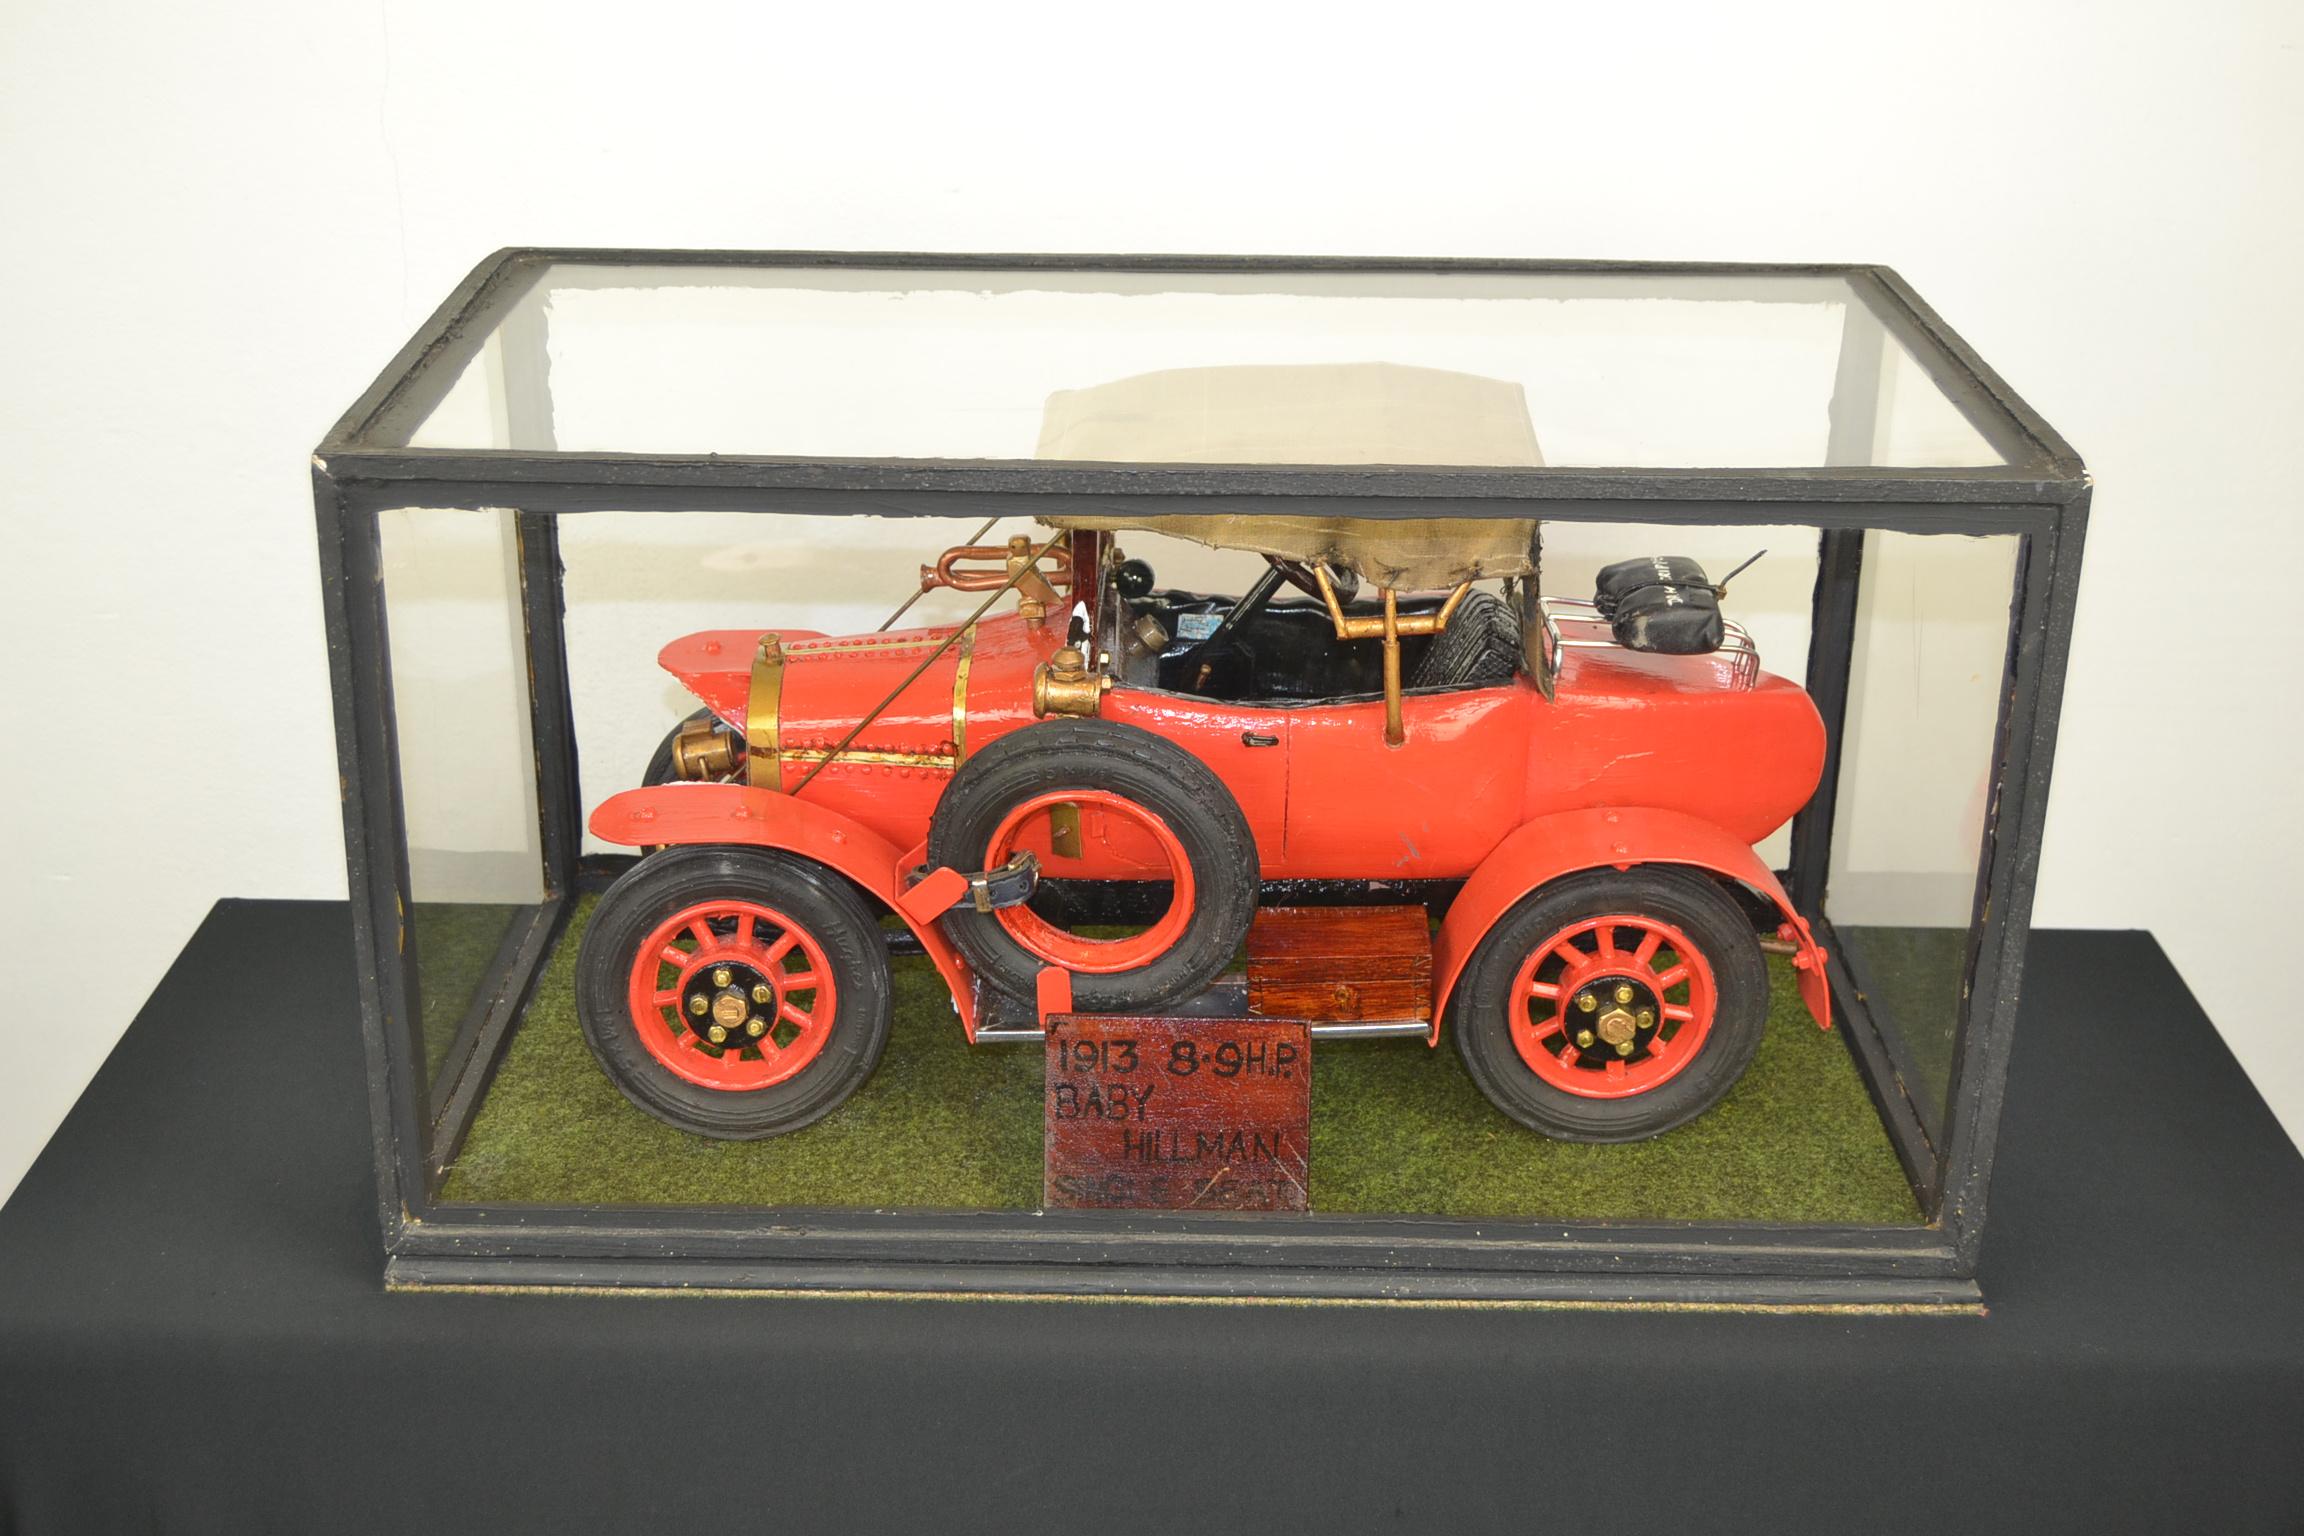 Large Hillman 8.9 Hp 1913 Model Car of Dr. H. Crippen, Handcrafted, 1960s 10